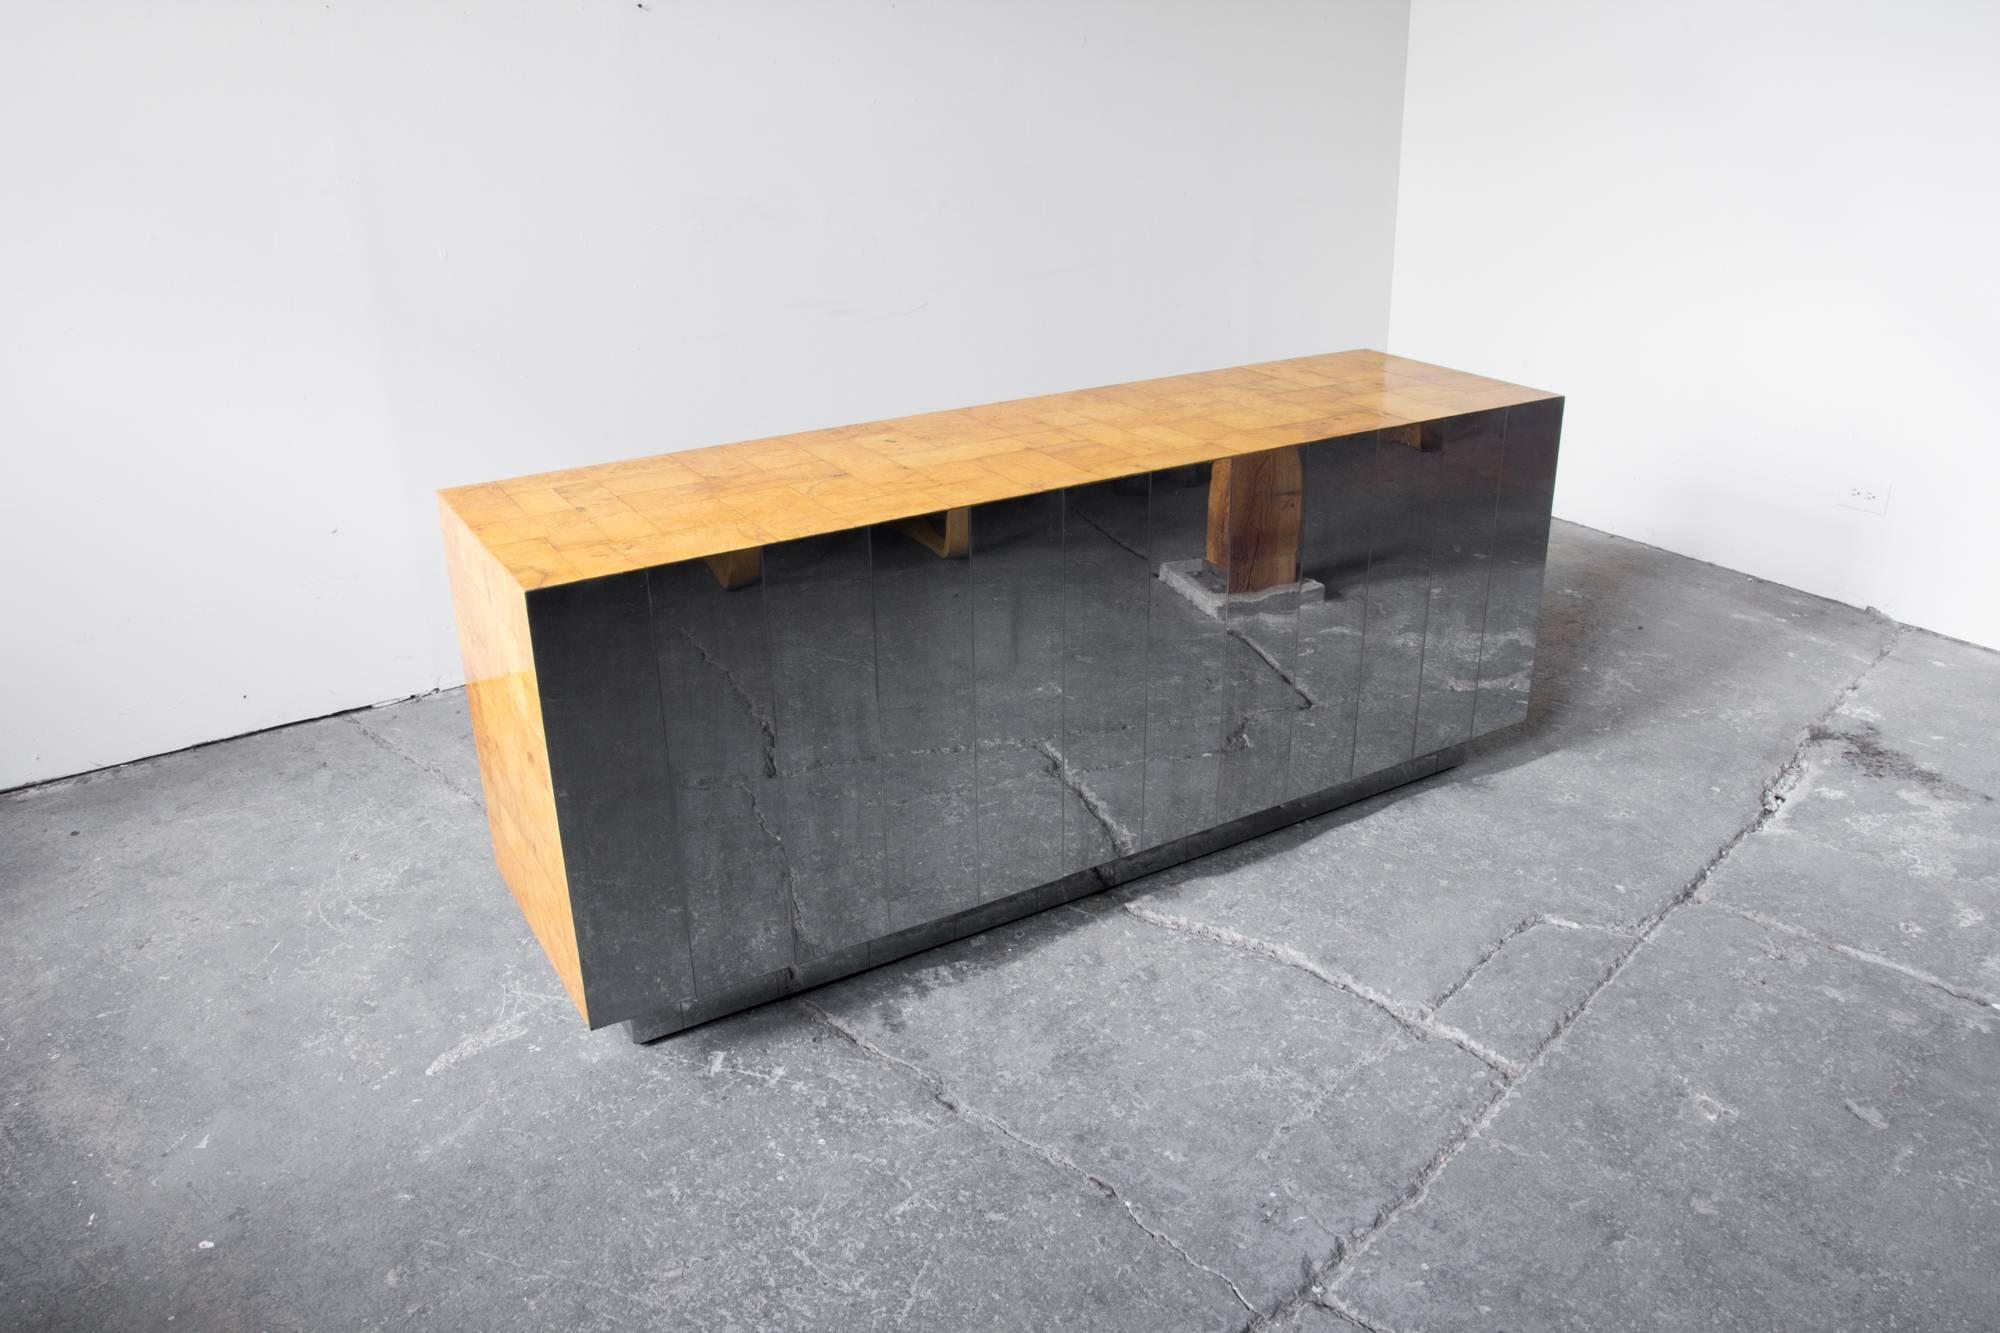 A stunning Paul Evans cabinet or credenza adorned in figural burl veneer and mirrored chrome tiles at the back. The cabinet is lifted from the ground on a well proportioned platform base. Its mirrored back at once lightens the bold presence and